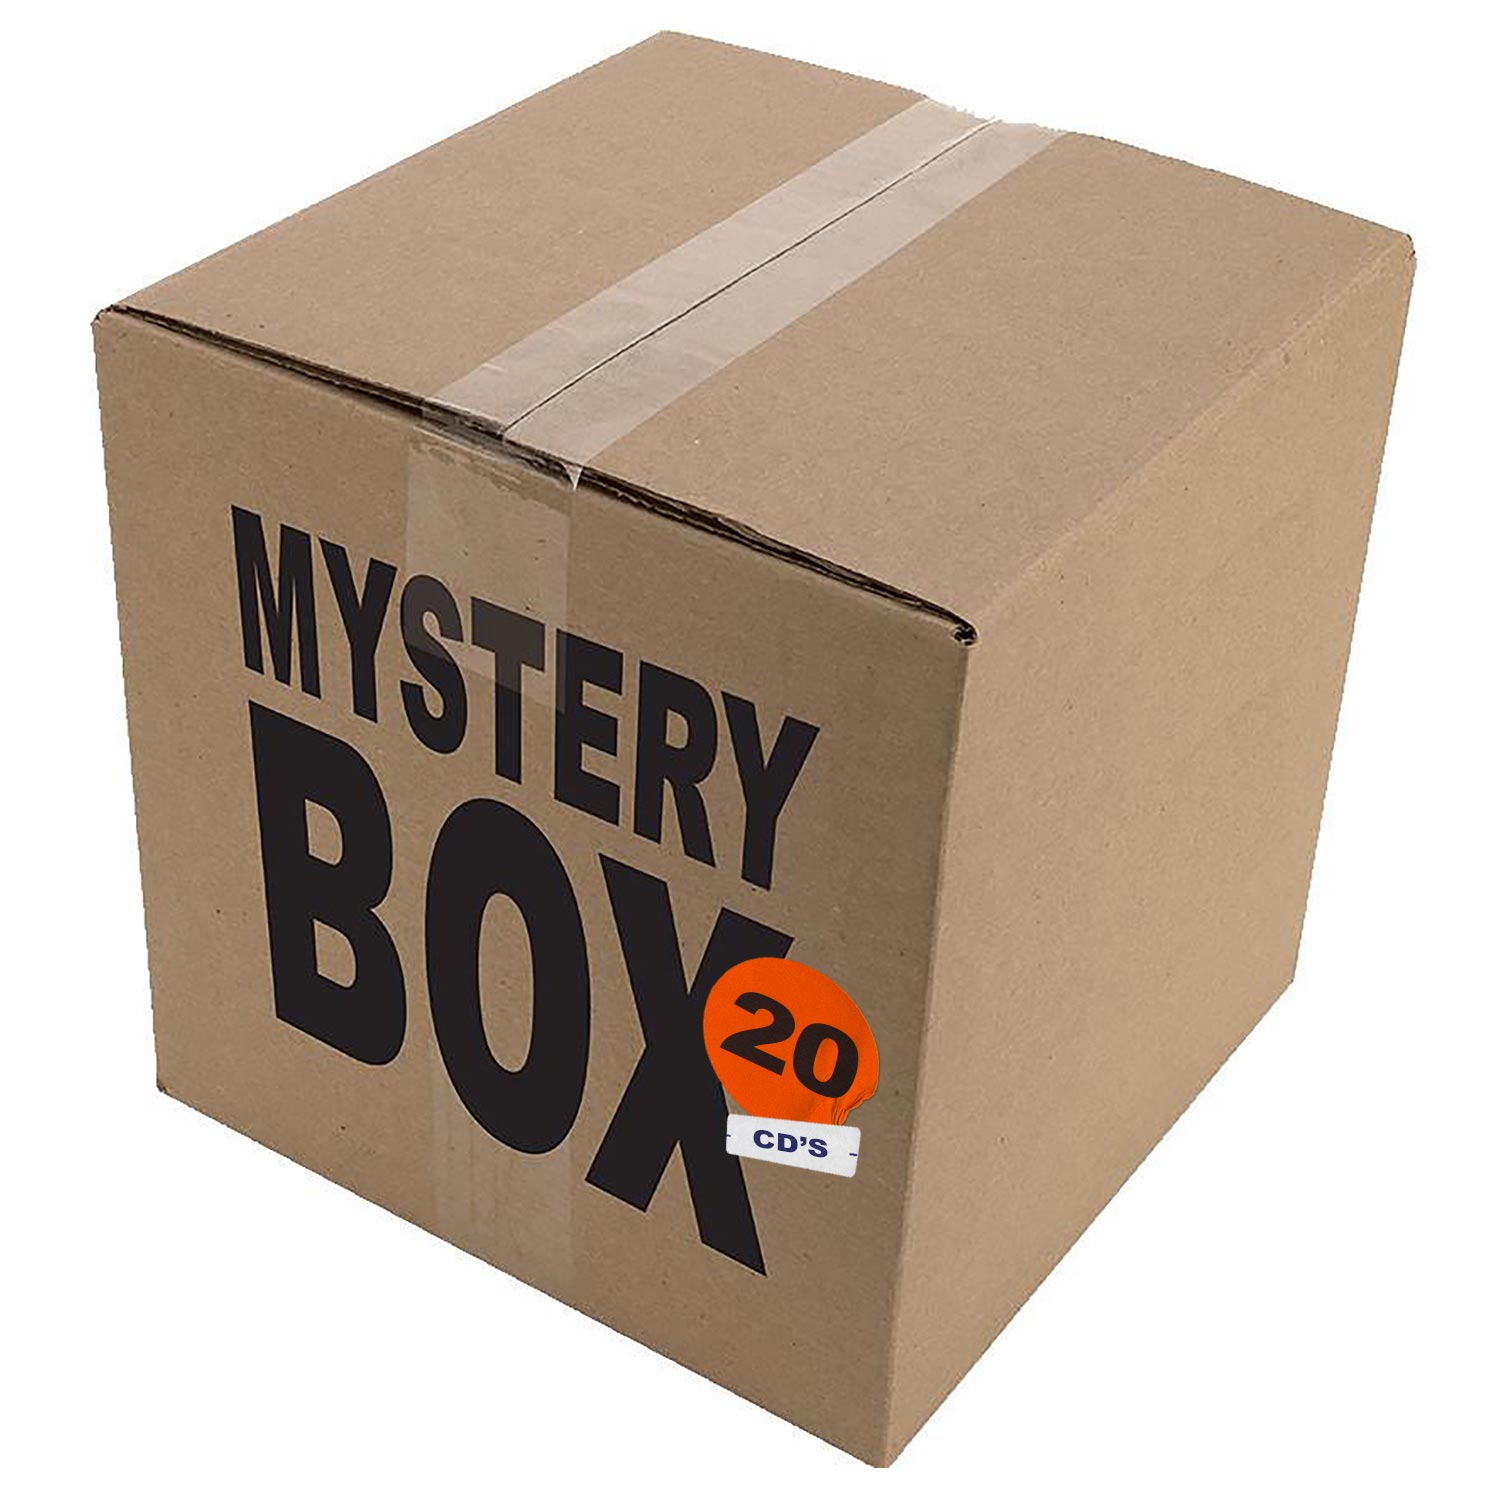 Mystery Boxes – HEDGY TIME